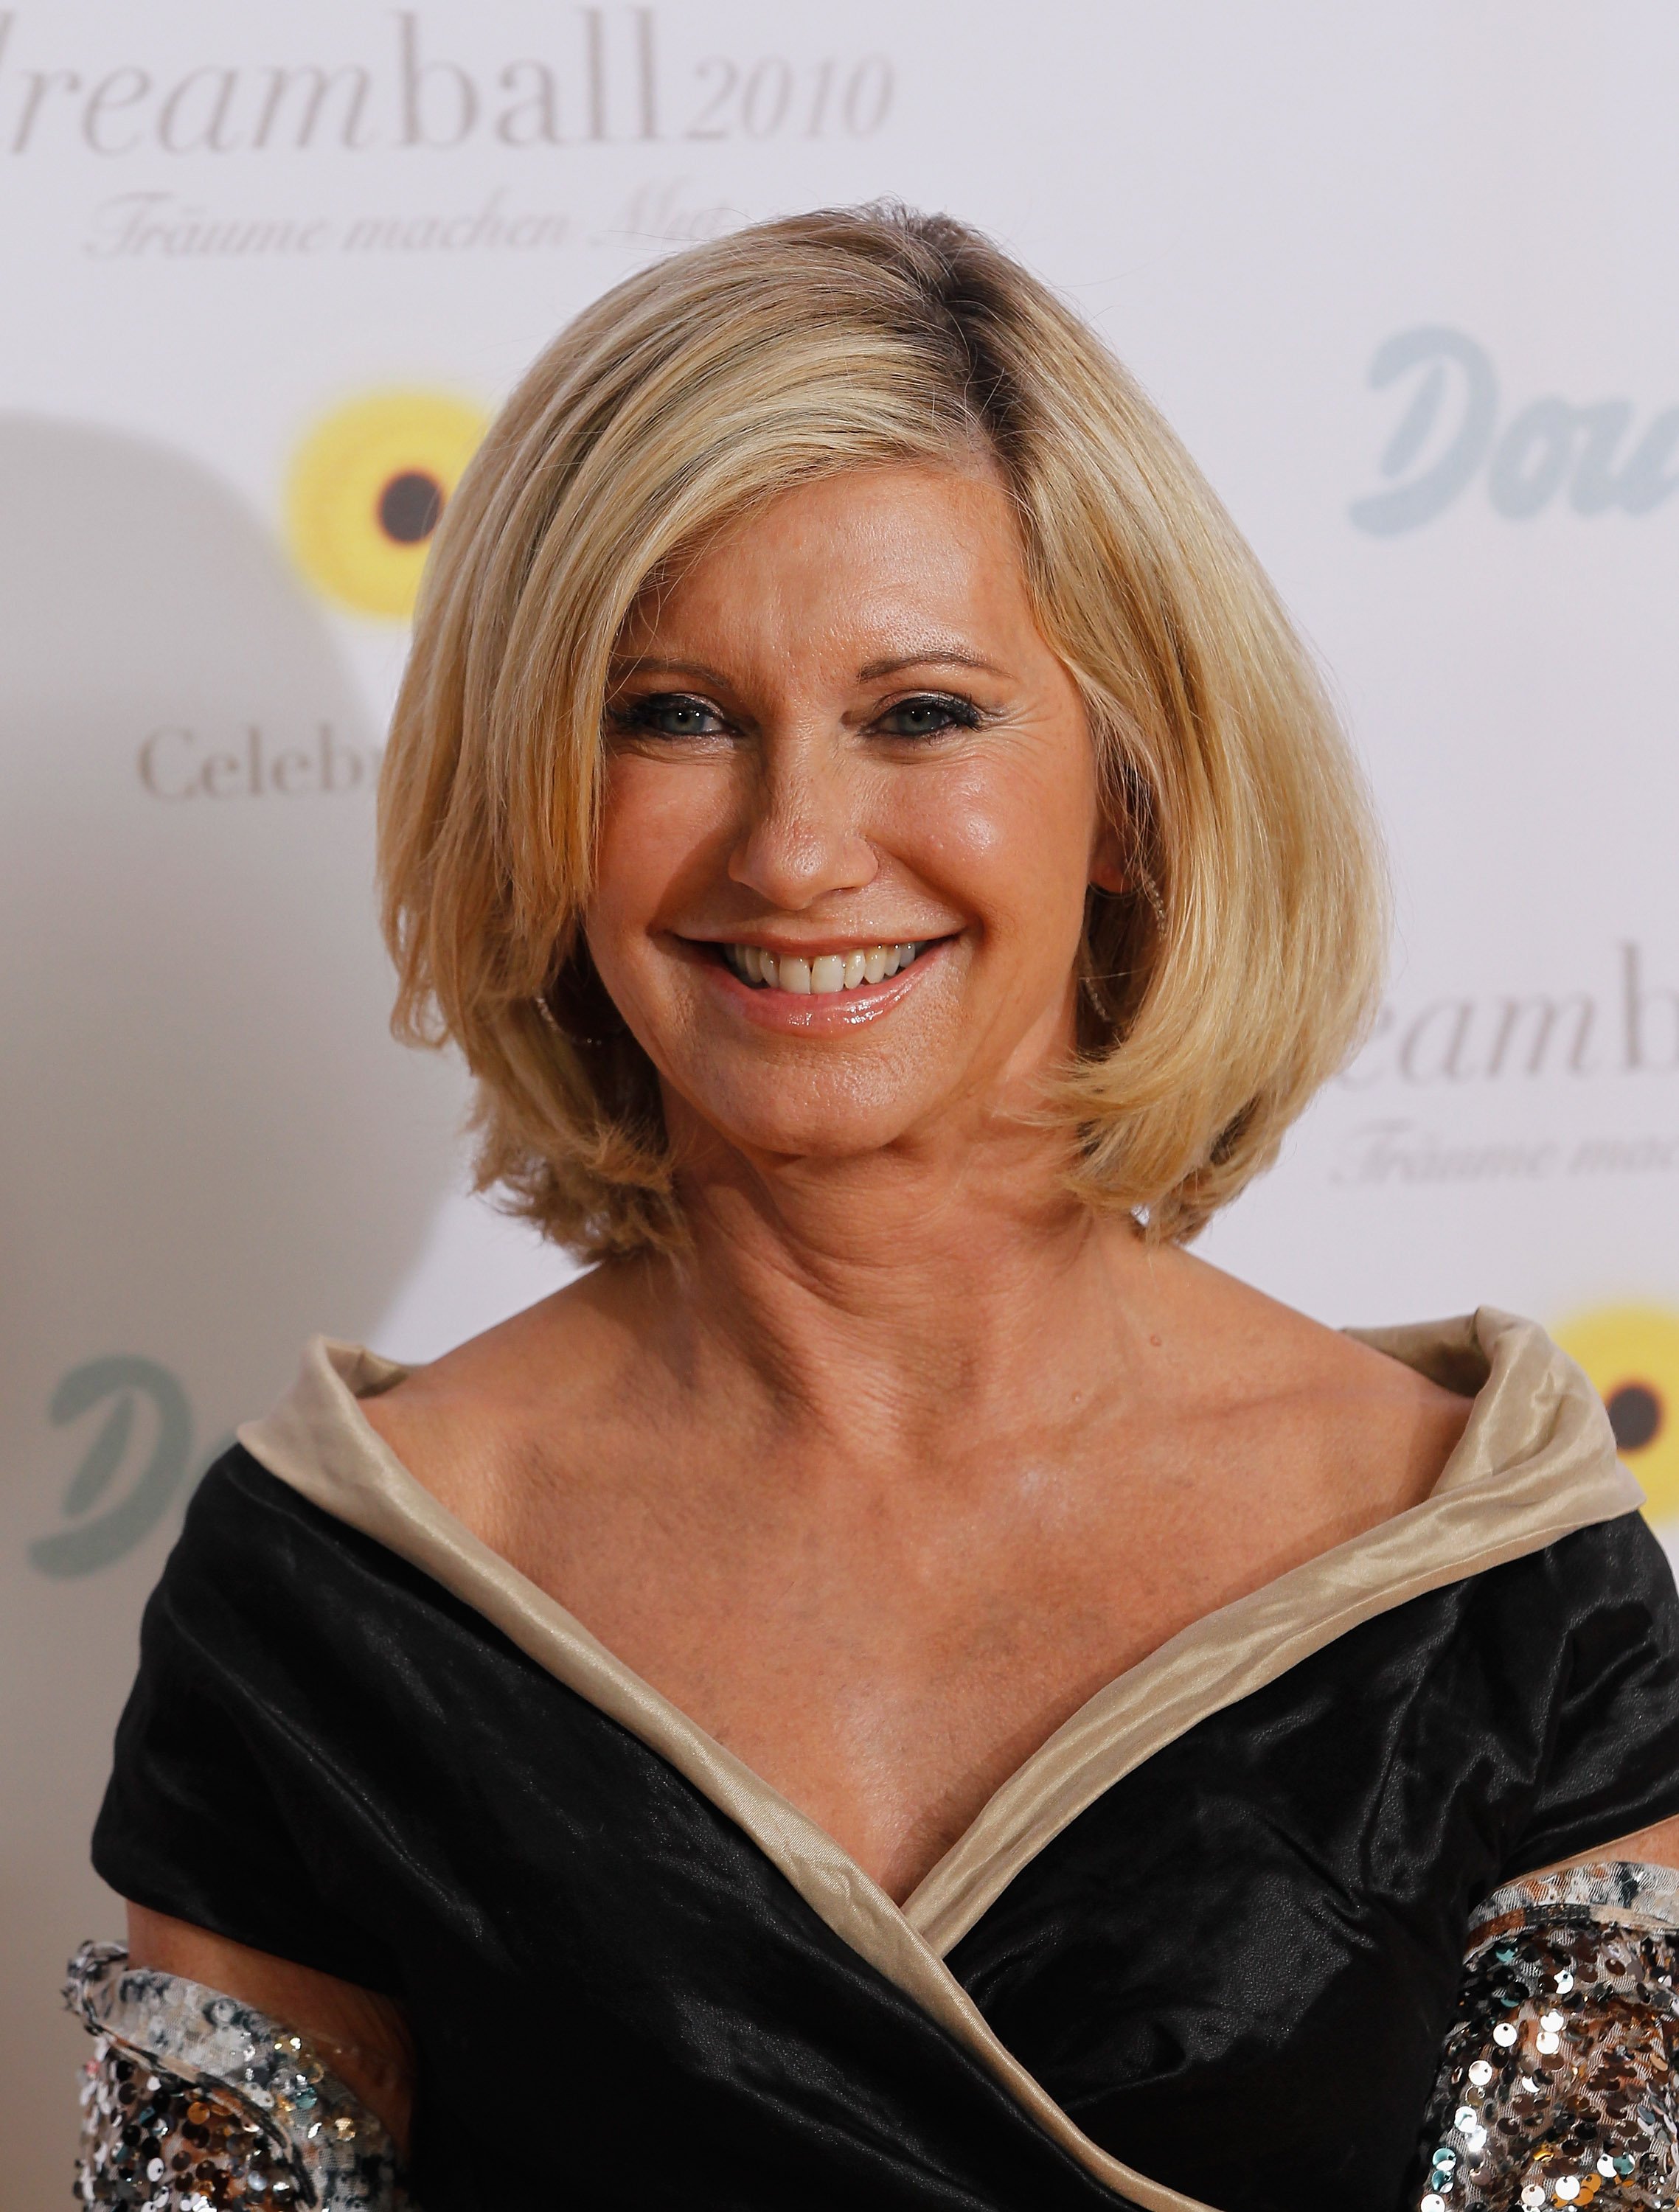 Olivia Newton-John attends the Dreamball 2010 charity gala at the Grand Hyatt hotel on September 23, 2010, in Berlin, Germany. | Source: Getty Images